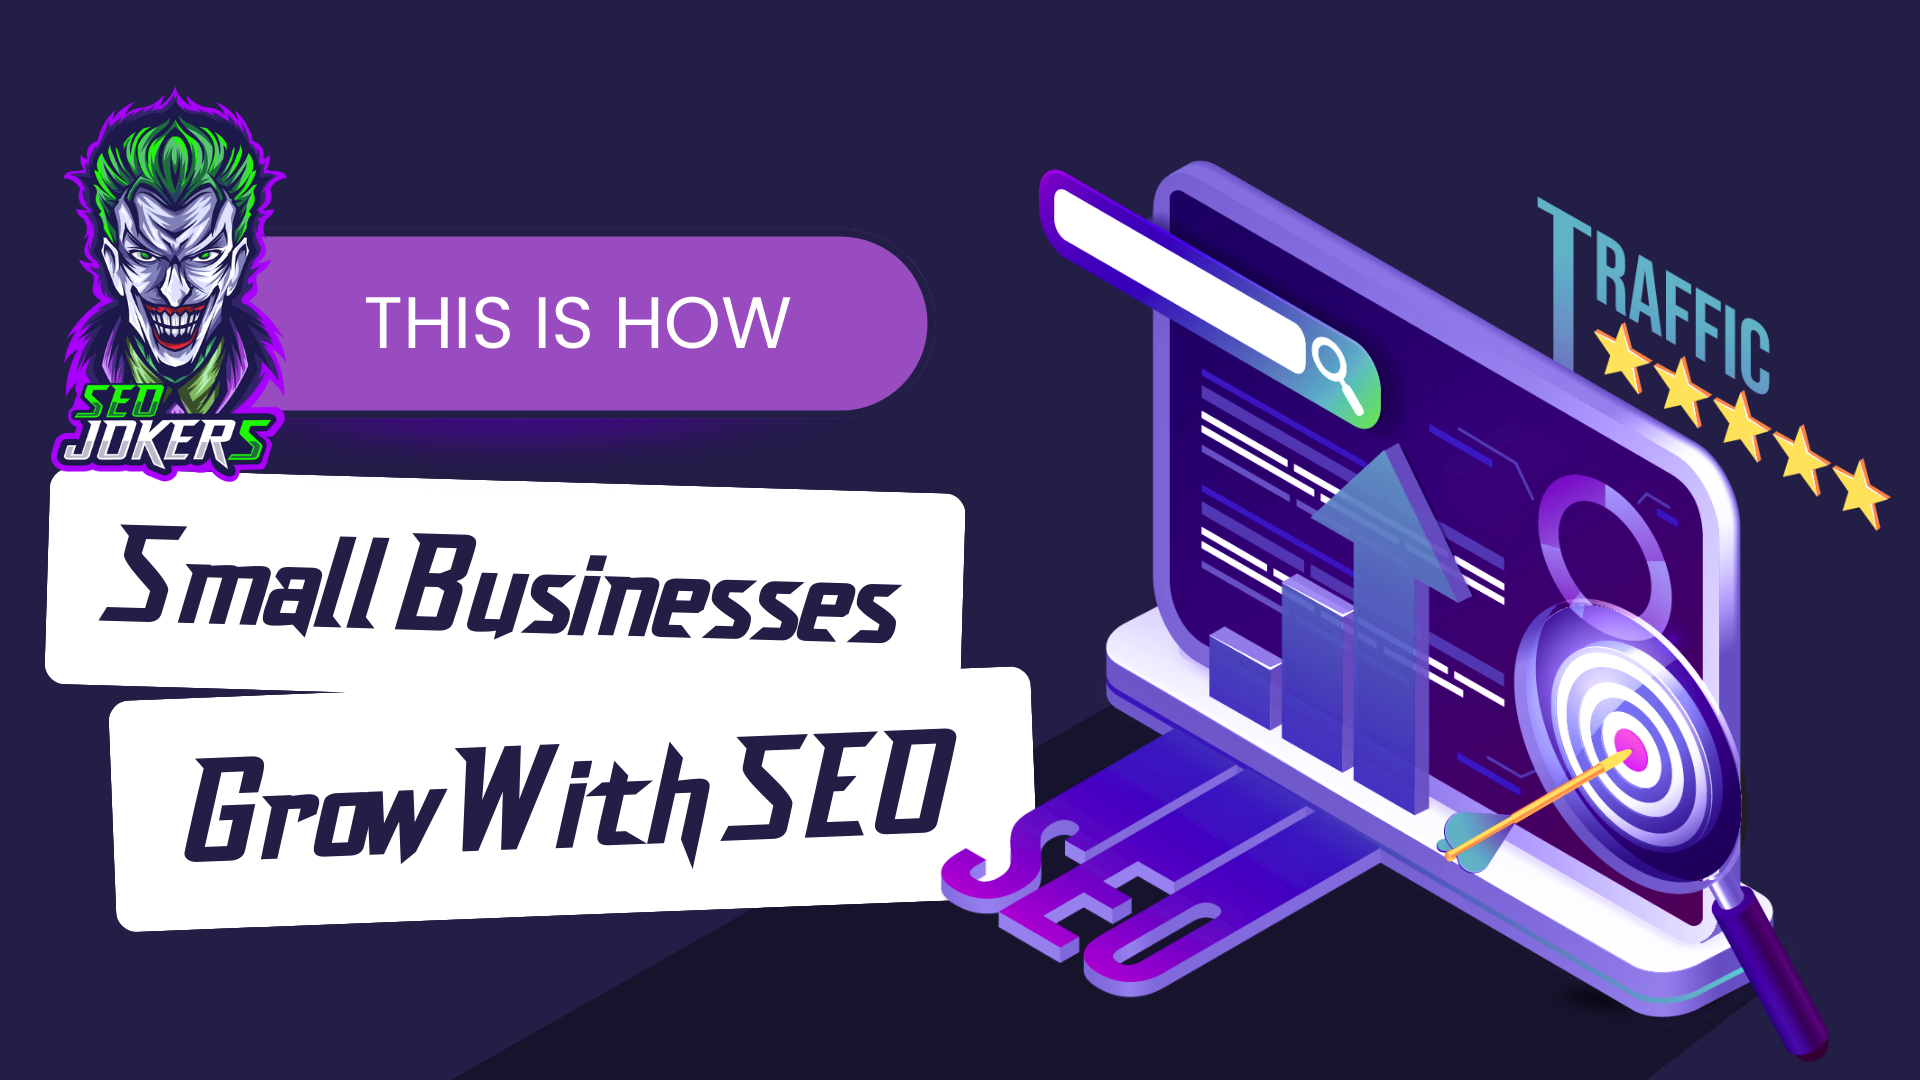 This is how small businesses grow with seo